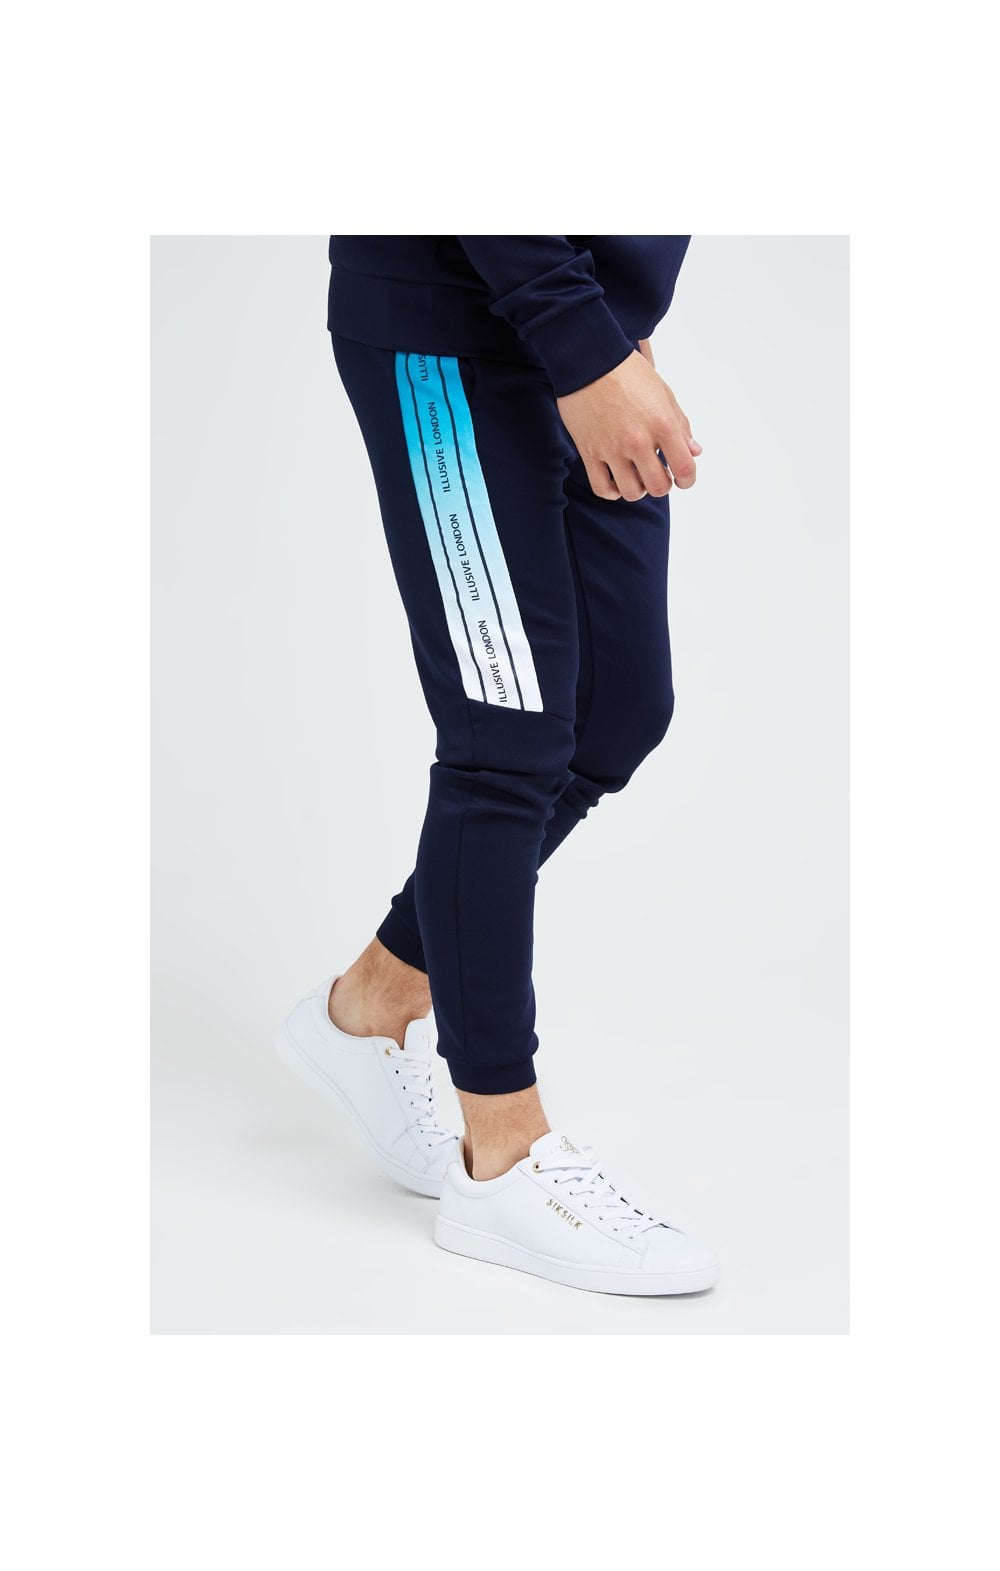 Illusive London Flux Taped Joggers - Navy & Blue (1)